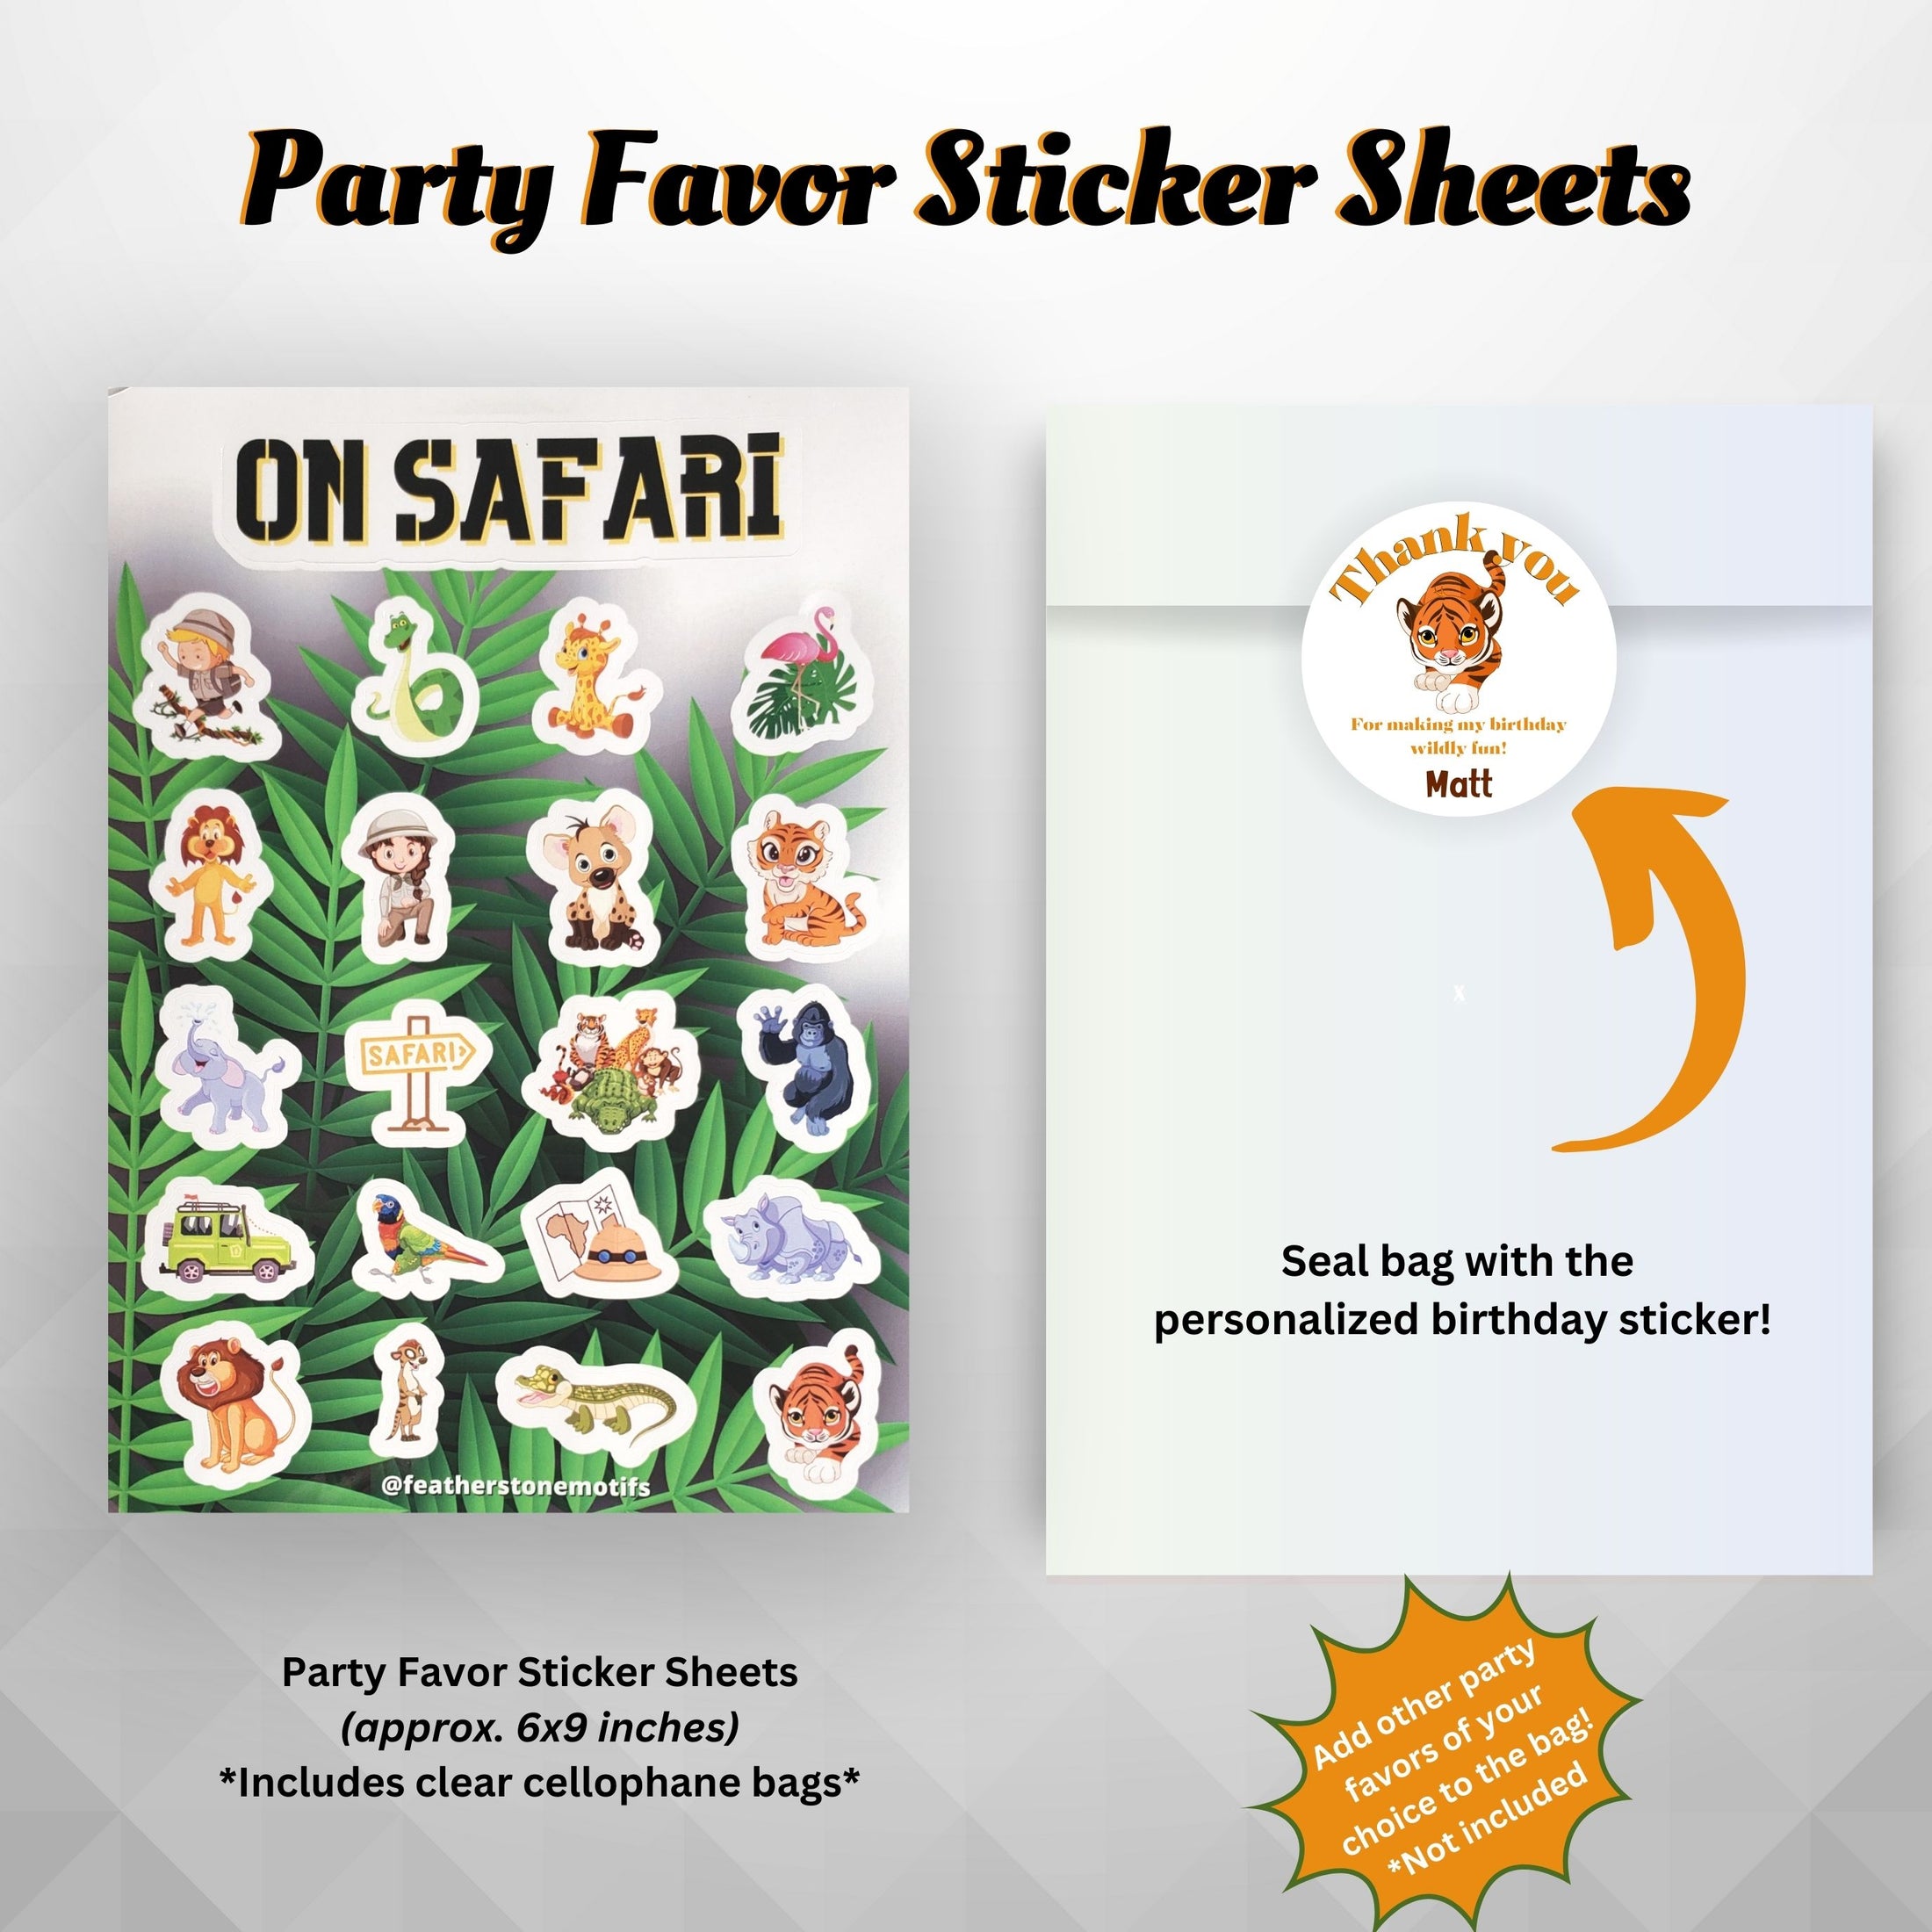 This image shows the on safari sticker sheet included as a party favor, the cellophane bag, and the personalized paper thank you sticker.